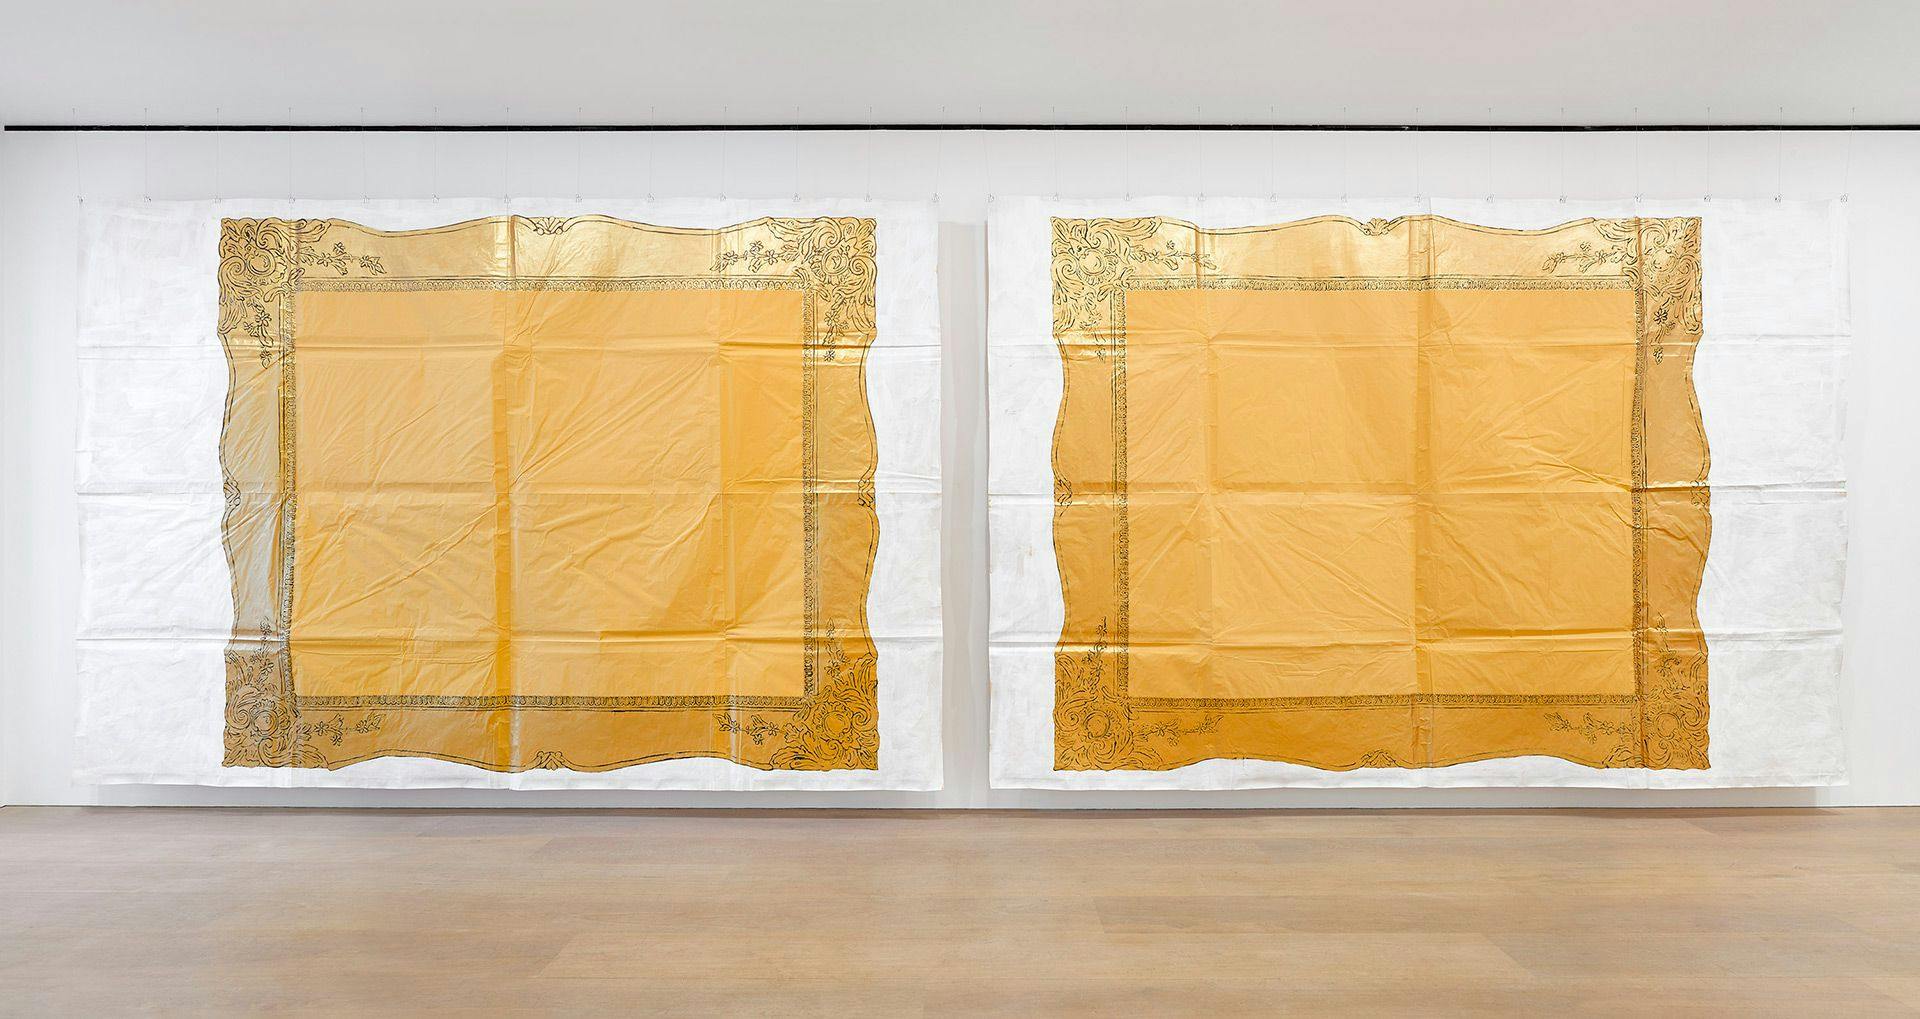 An installation view of an exhibition titled, Maxwell Alexandre, Pardo é Papel: Close a door to open a window, at David Zwirner London in 2020.